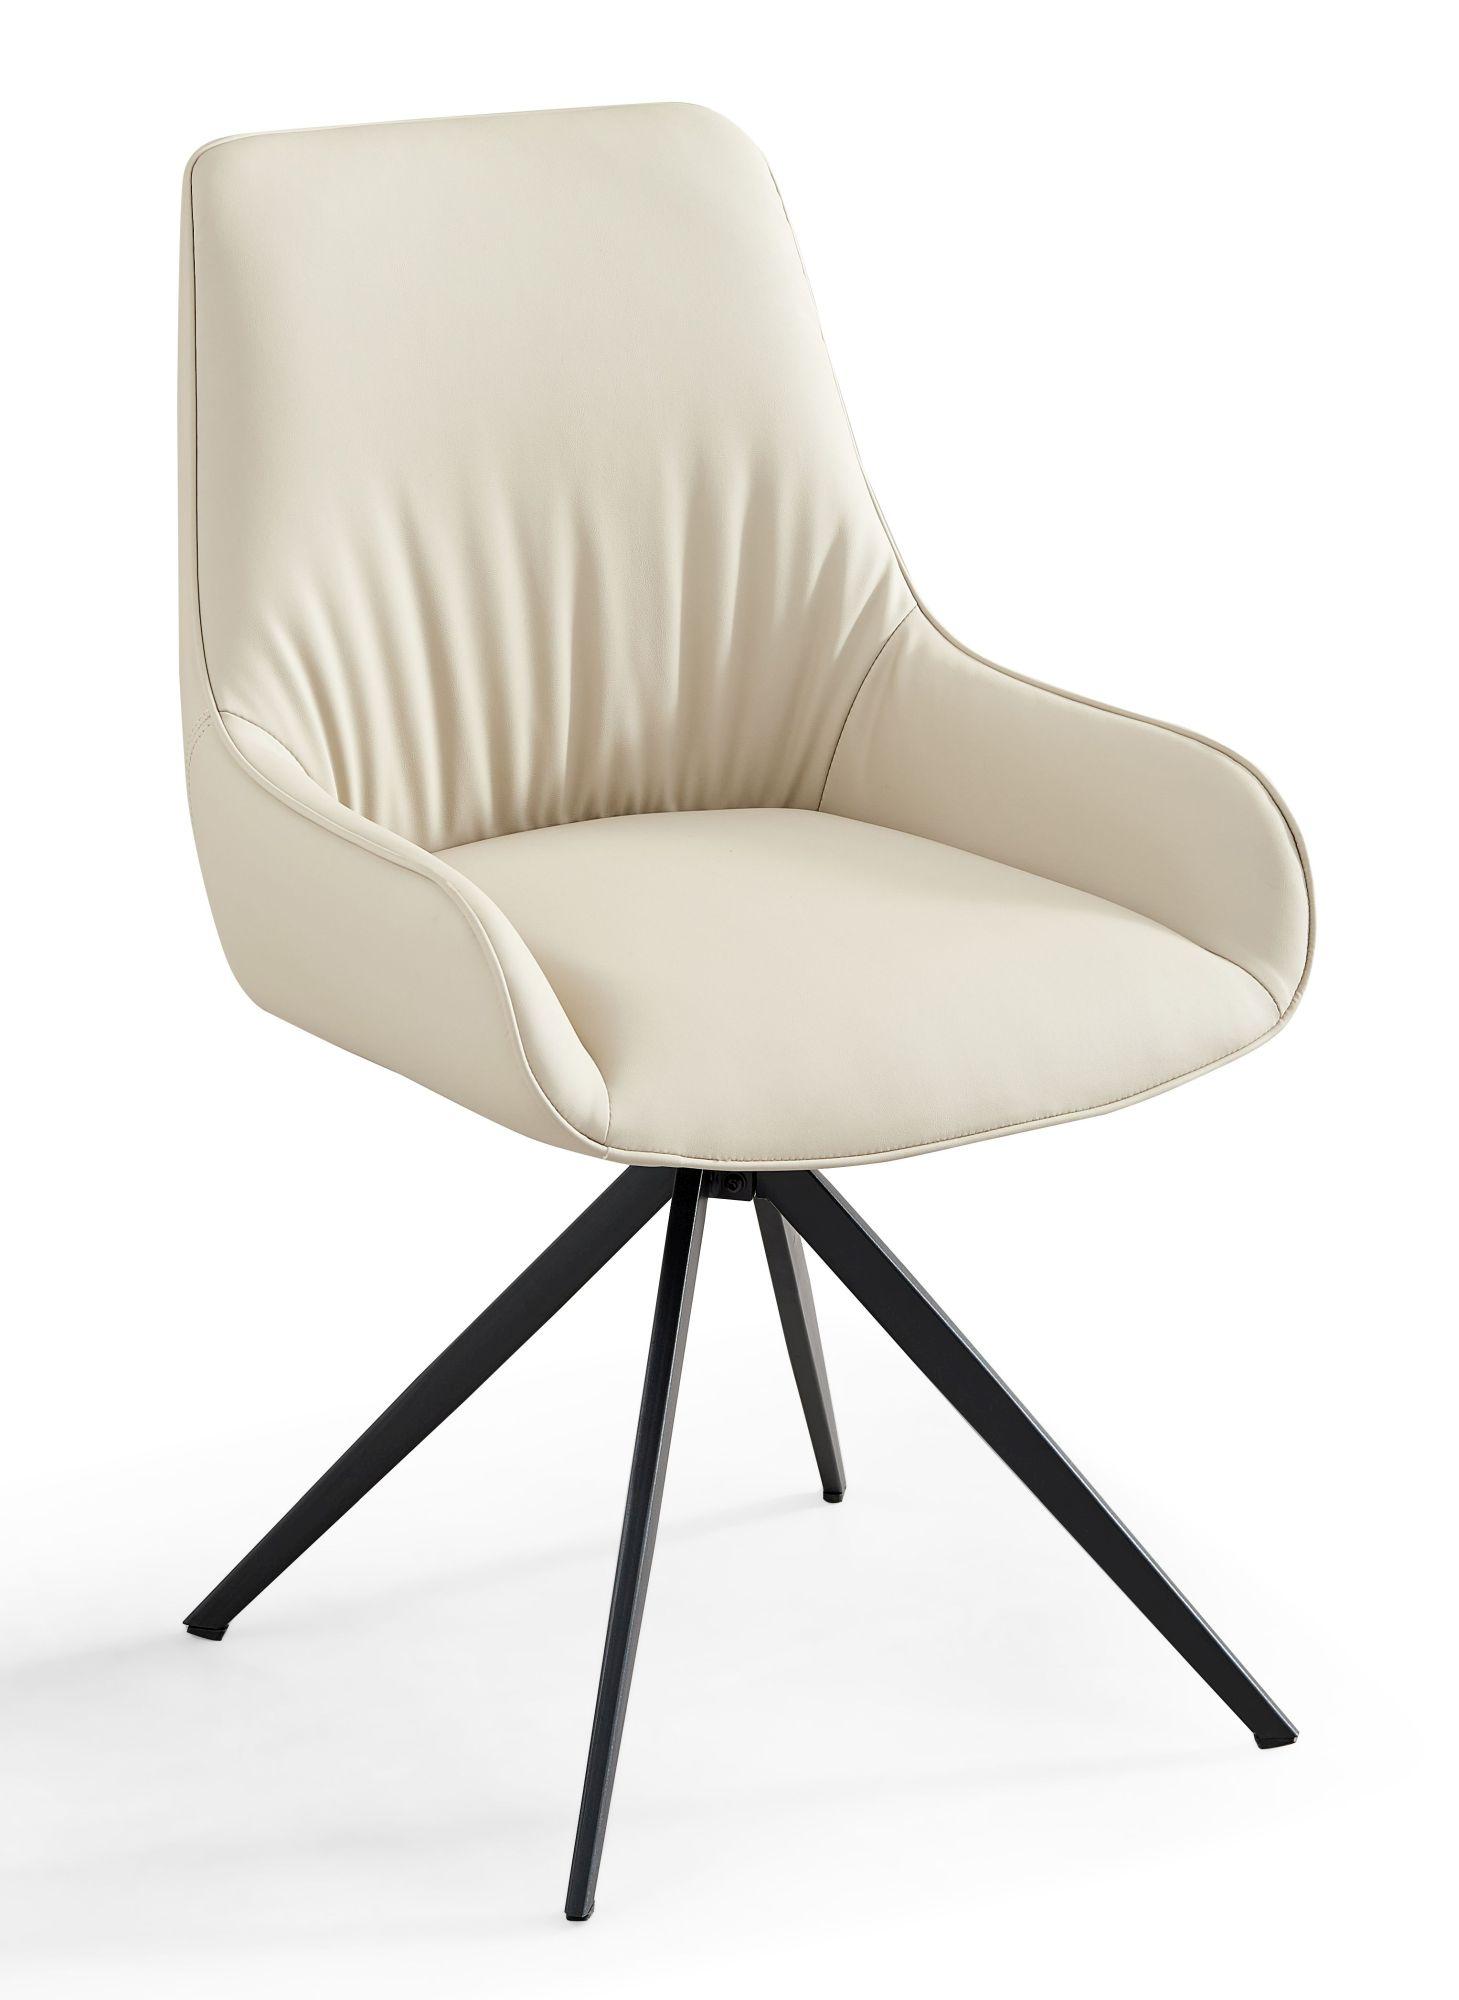 Monza Cream Faux Leather Swivel Dining Chair with Black Legs